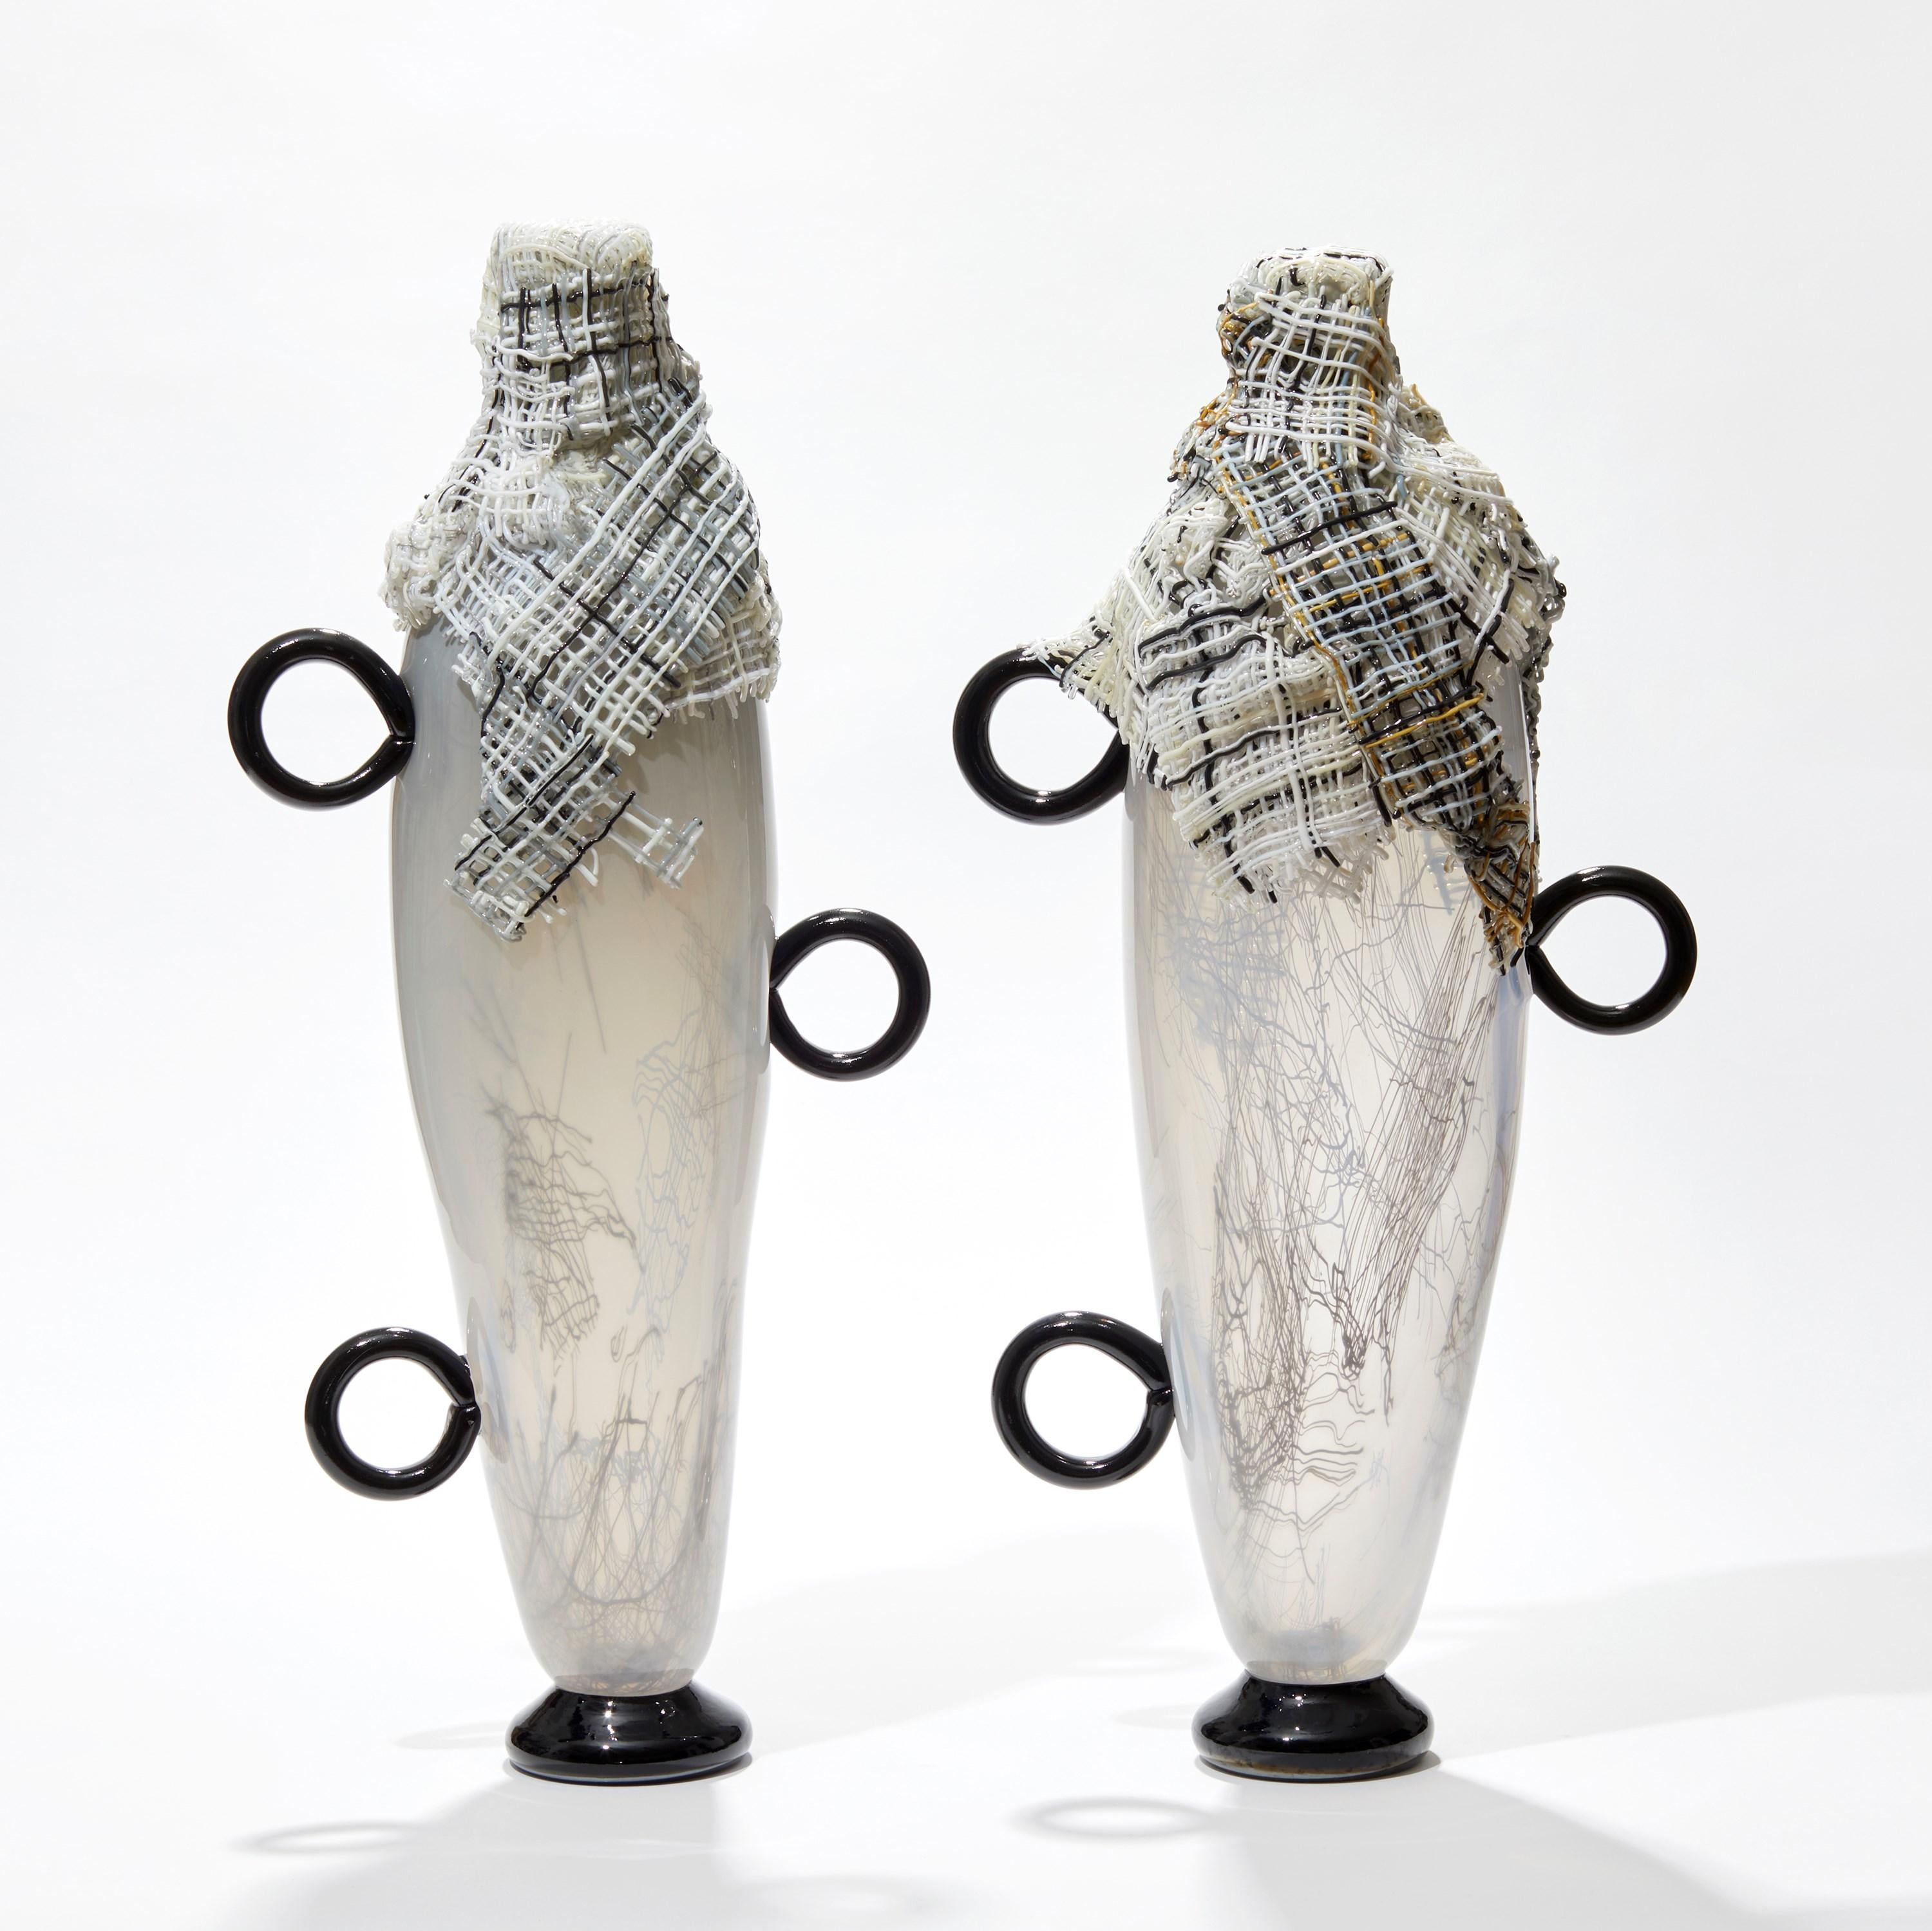 Contemporary Only Hope Remains I, black & white standing glass sculpture by Cathryn Shilling For Sale